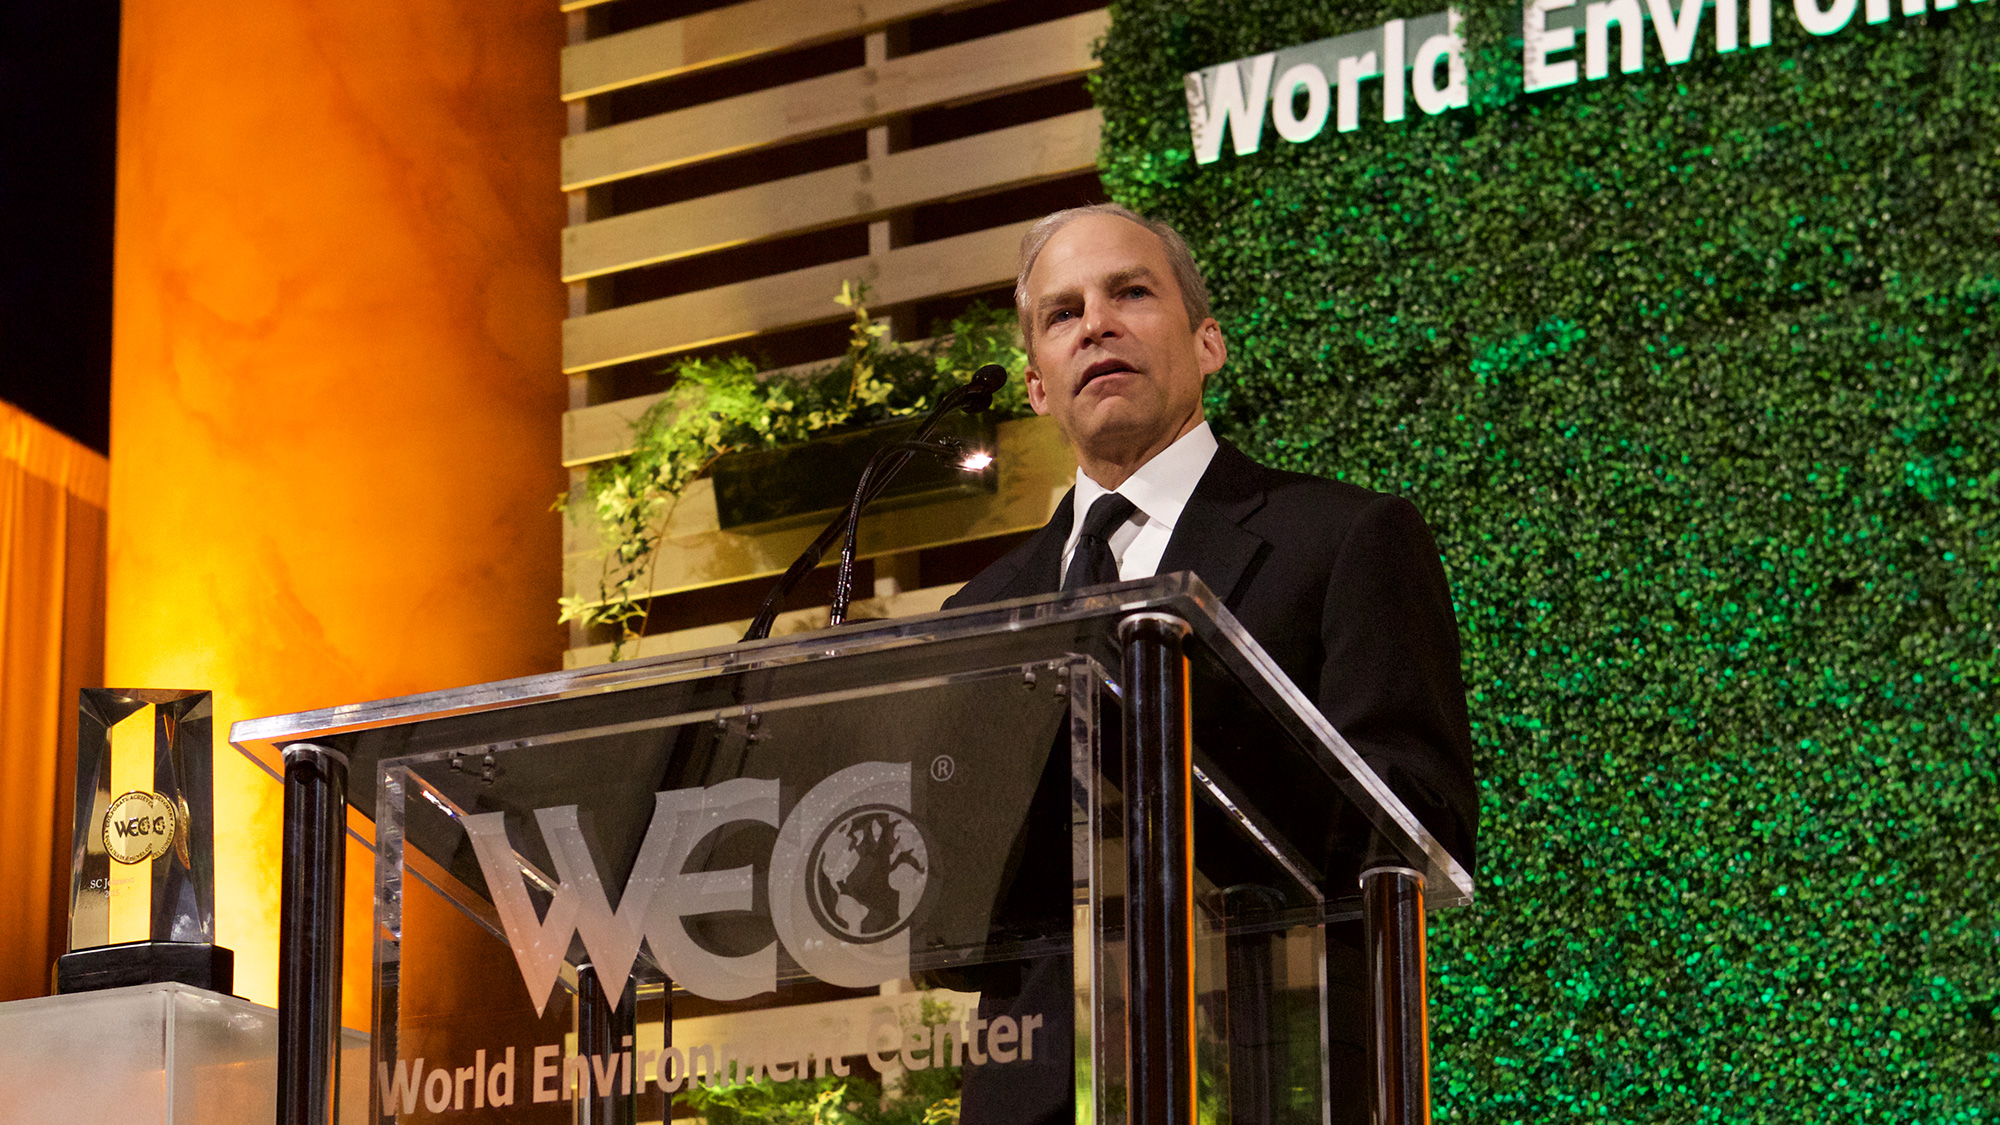 H Fisk Johnson accepts World Environment Center’s 2015 Gold Medal Award for sustainable development achievements